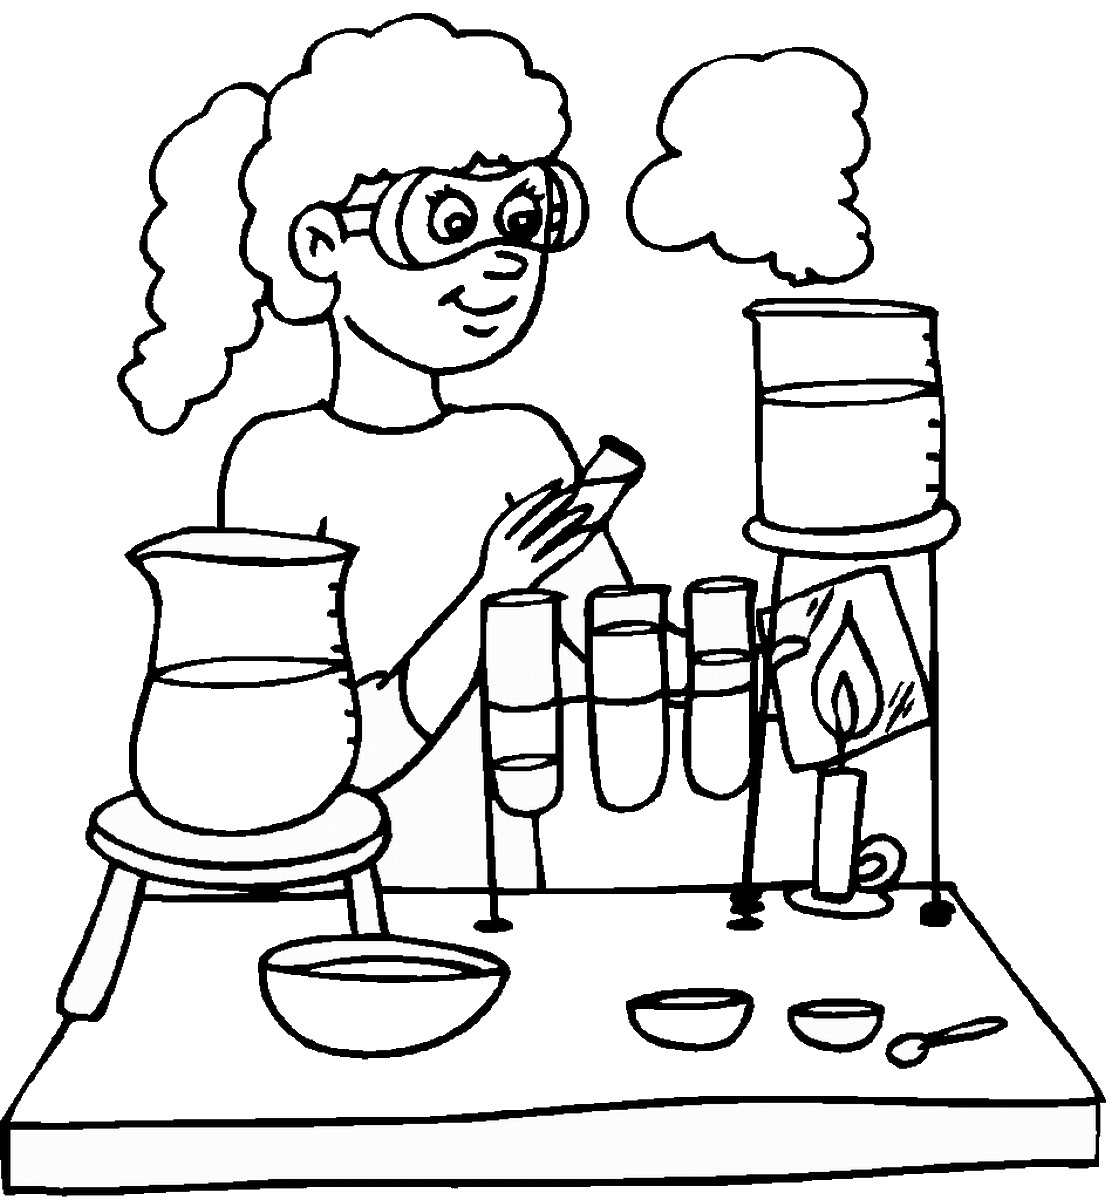 Science coloring pages to download and print for free